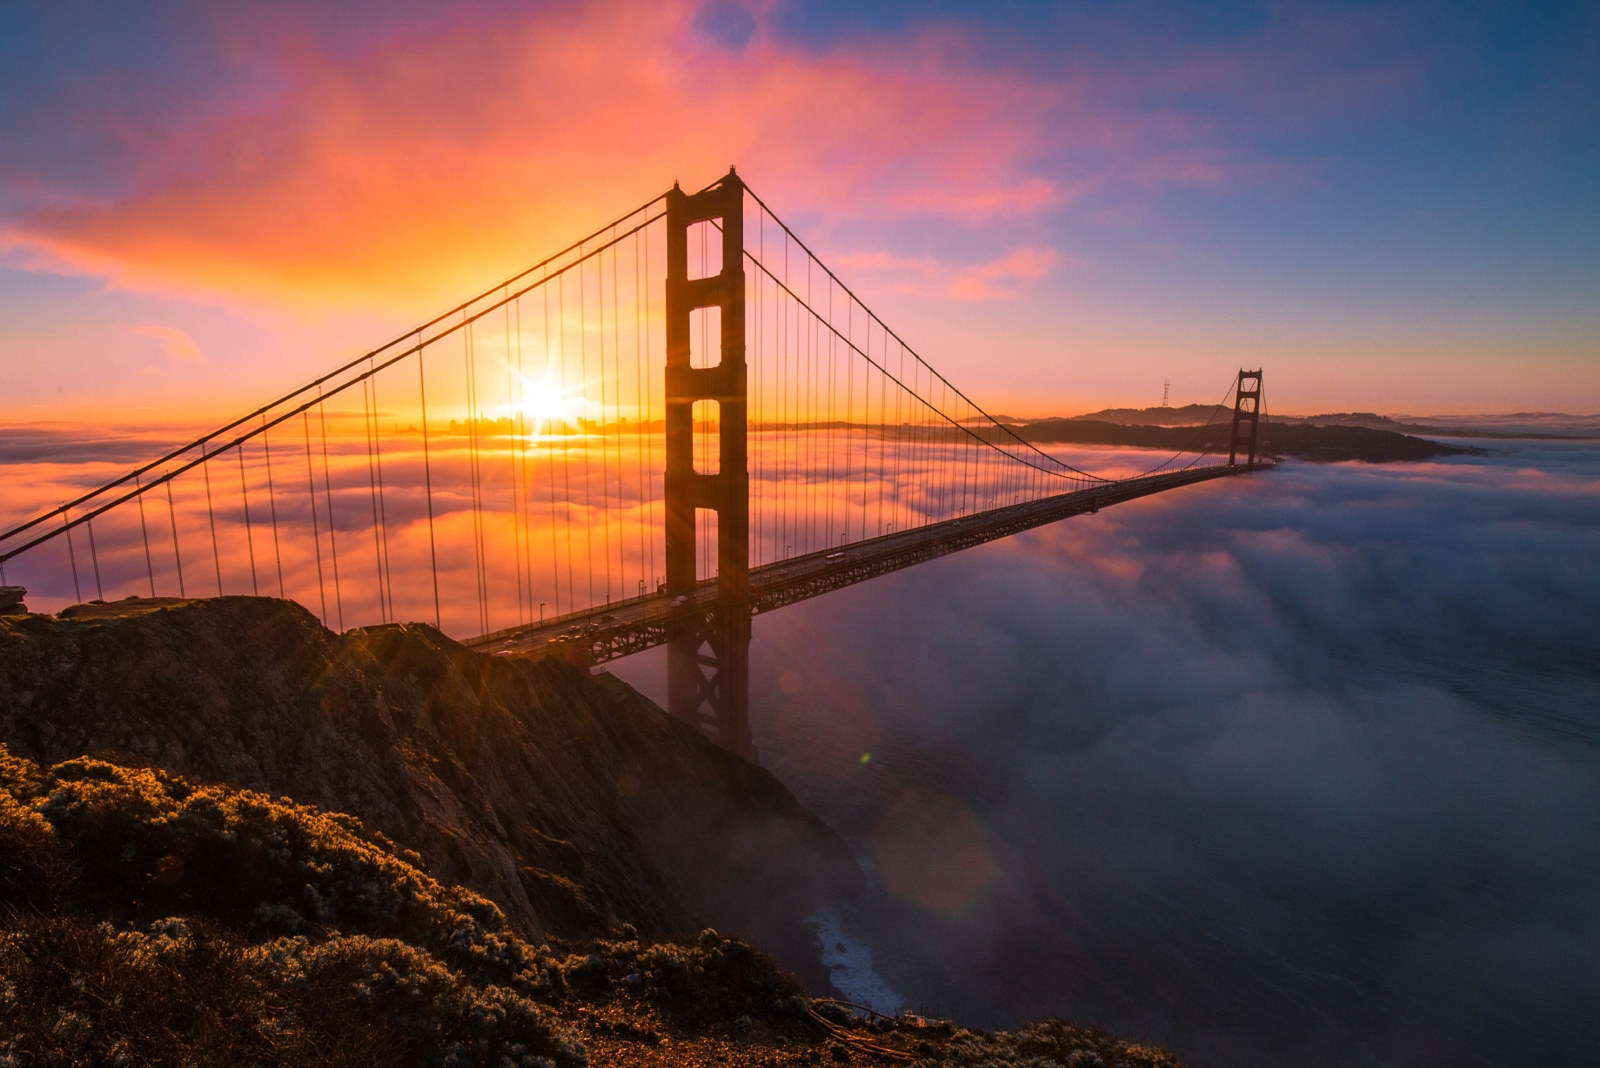 20 Sublime Photos Documenting A Day in the Life of the Golden Gate Bridge